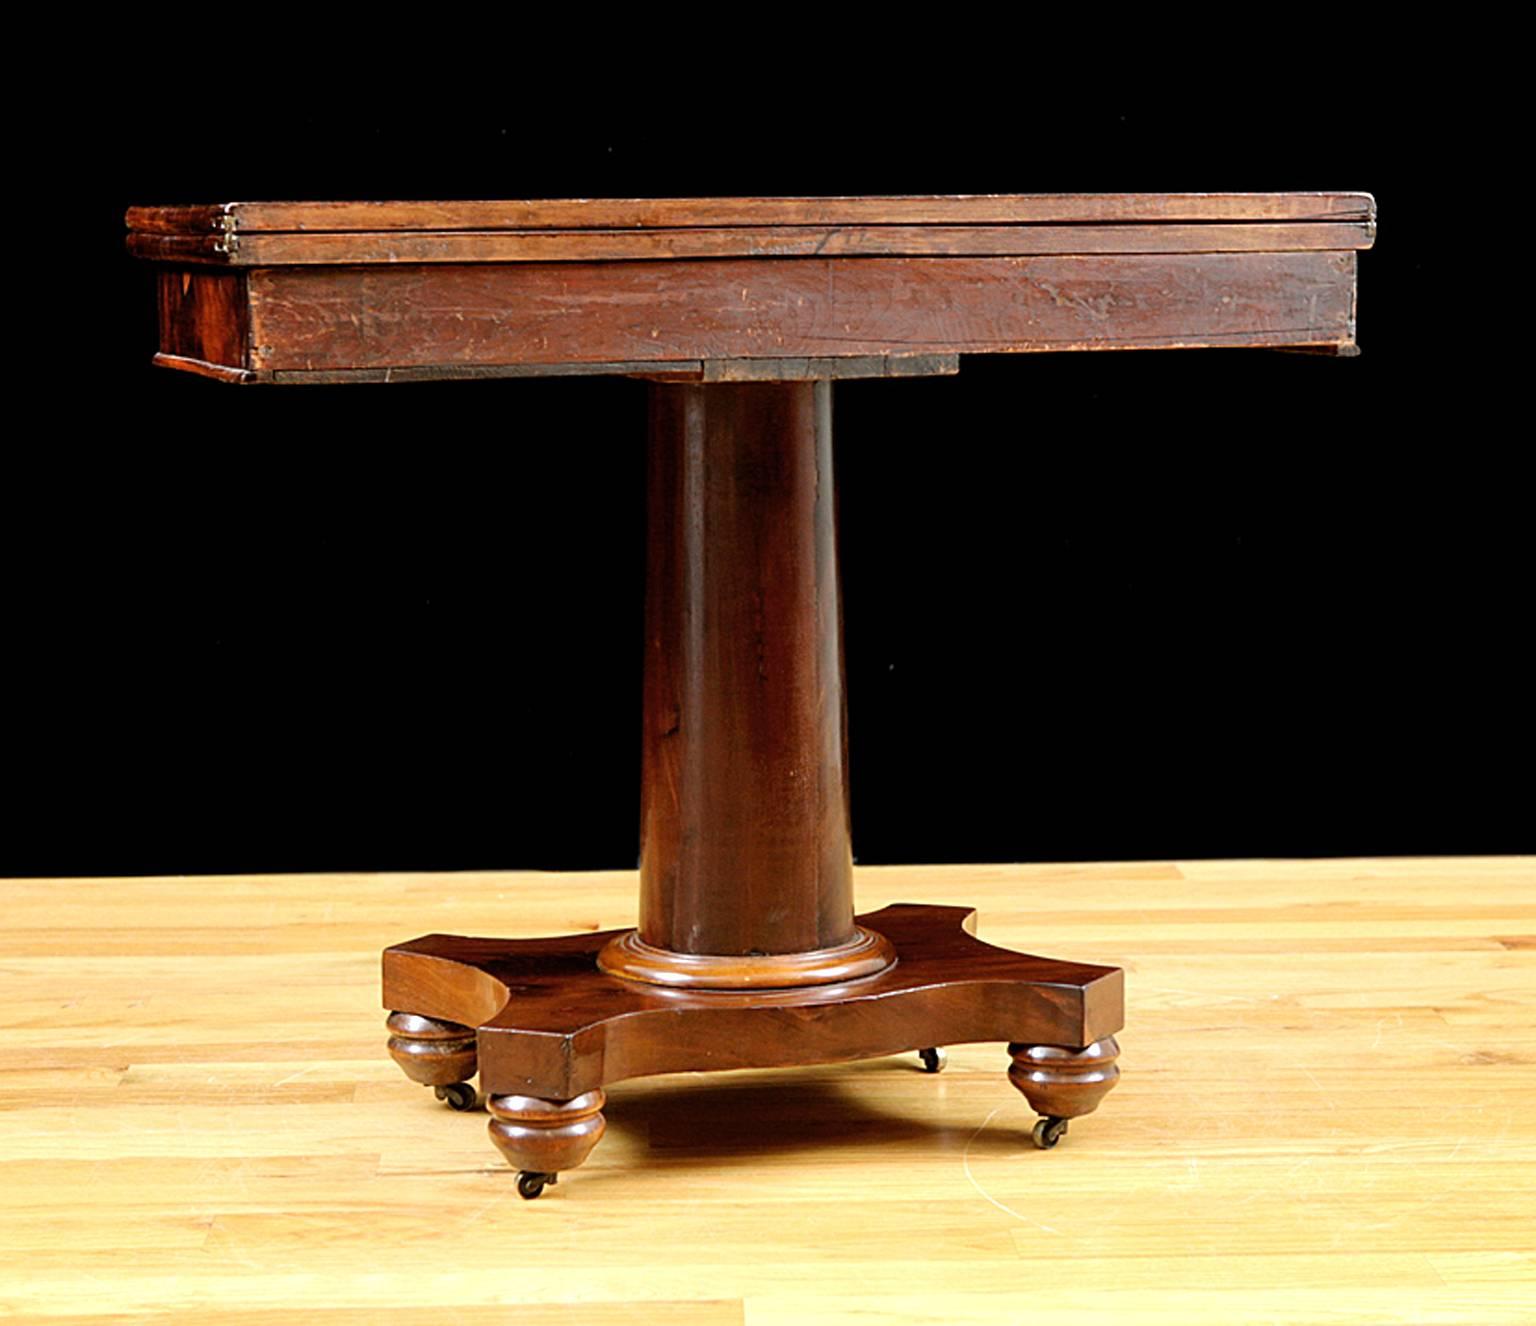 Antique American Empire Card/ Games Table in West Indies Mahogany with Pedestal In Good Condition For Sale In Miami, FL